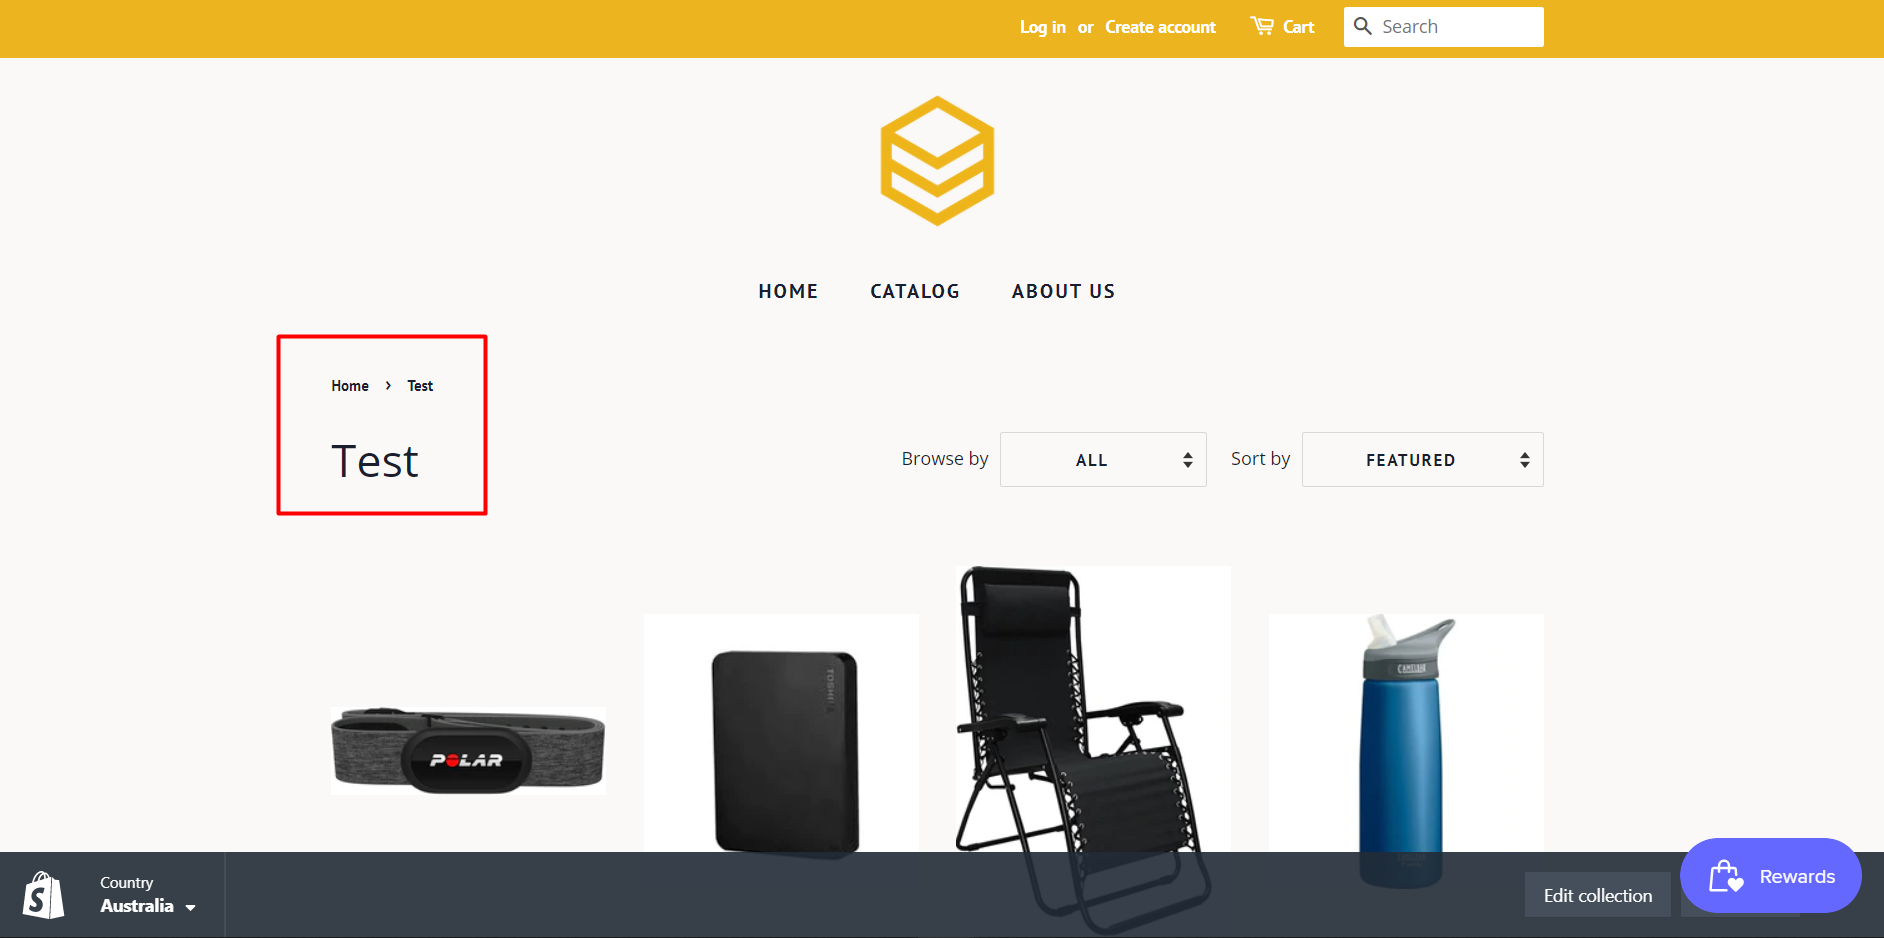 After creating a smart collection in Shopify store